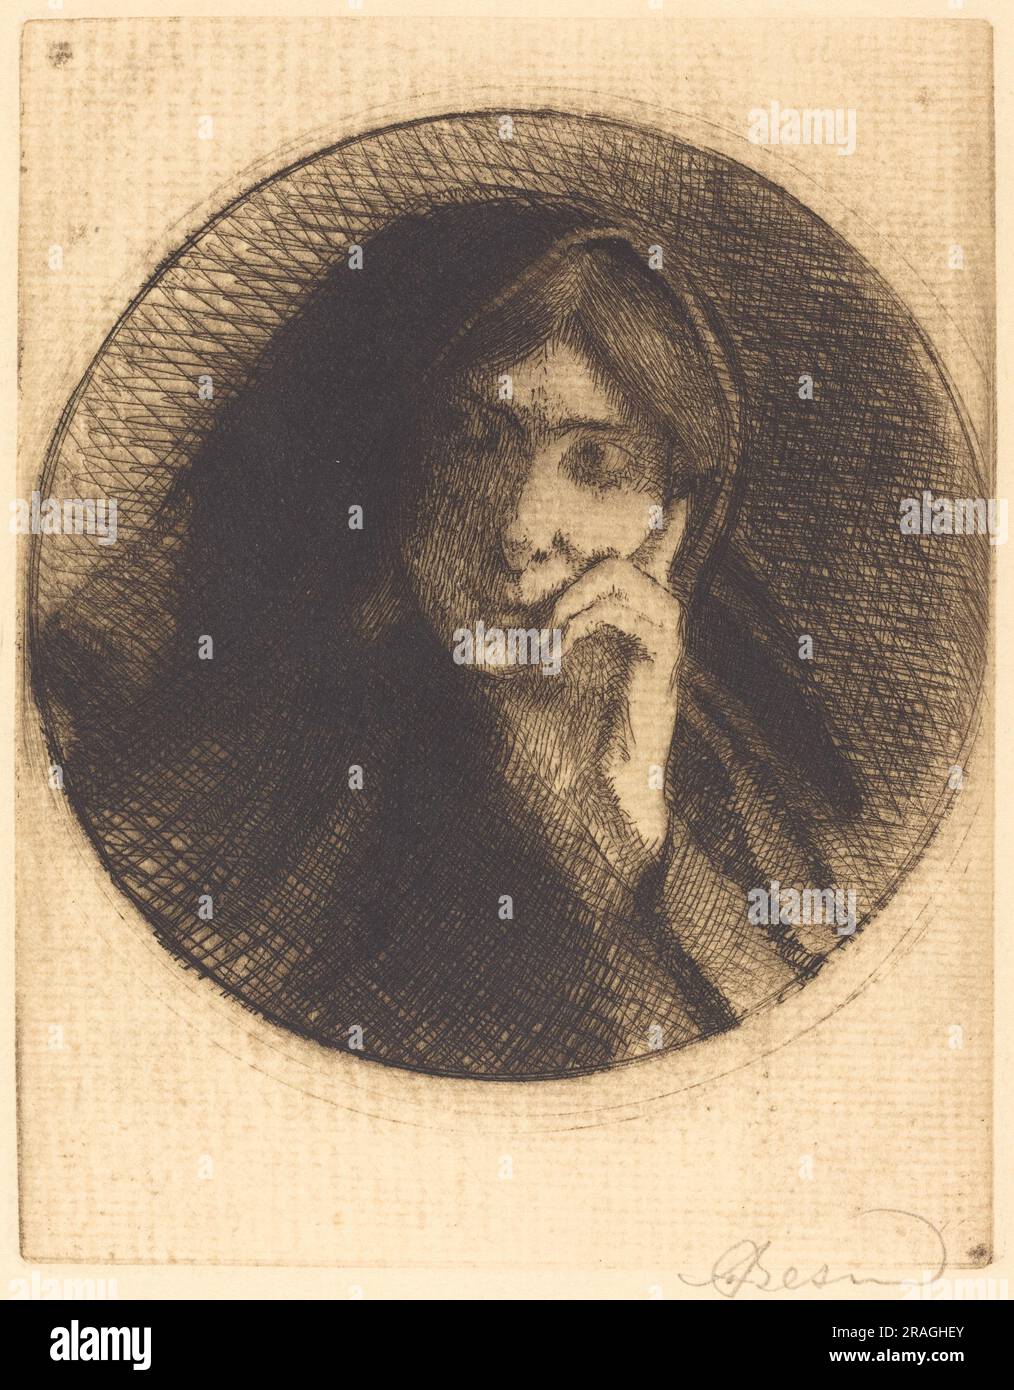 'Albert Besnard, Madame Aman Jean, 1898, etching in brown-black on cream laid paper, plate: 13.9 x 10.9 cm (5 1/2 x 4 5/16 in.) sheet: 17.3 x 14.3 cm (6 13/16 x 5 5/8 in.), Gift of Mr. and Mrs. Daniel Bell, 1994.4.3' Stock Photo